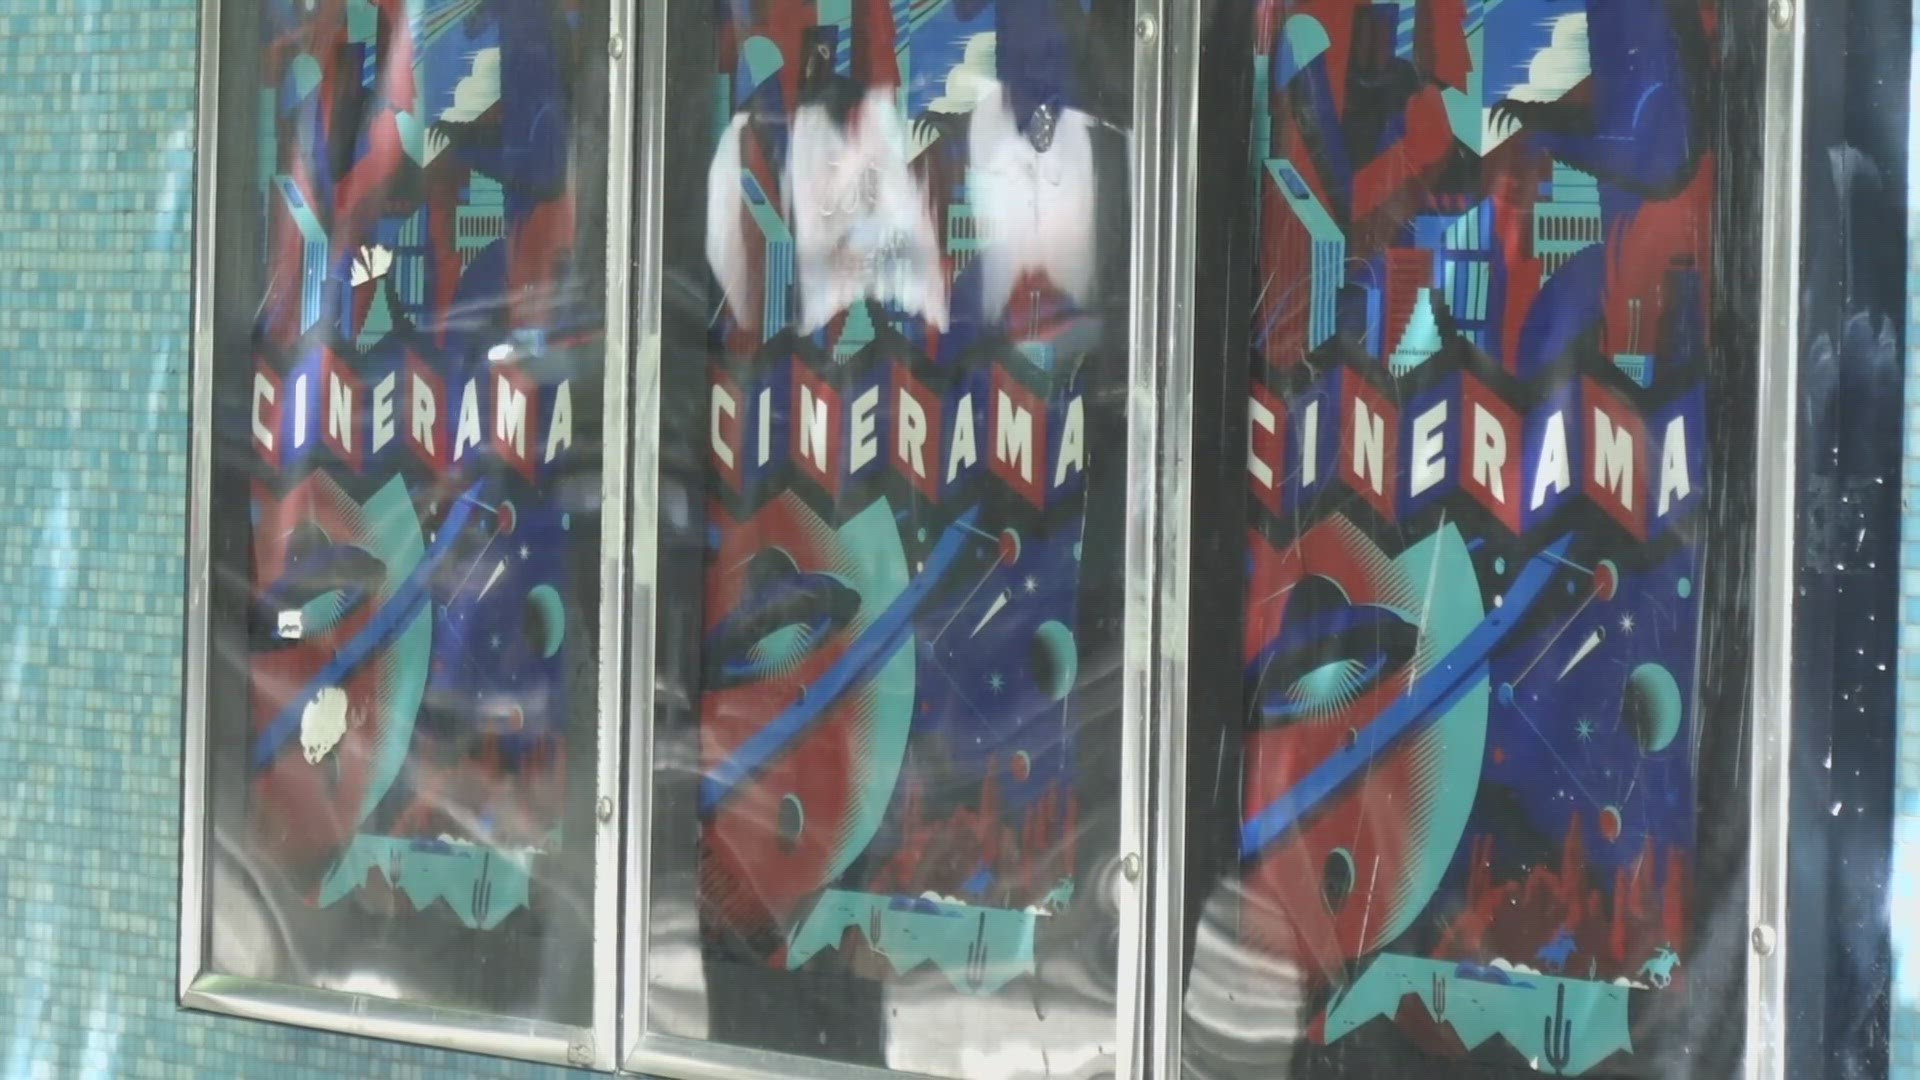 The Seattle City Council approved a one-time $950,000 grant to help SIFF reopen the Cinerama in Belltown.